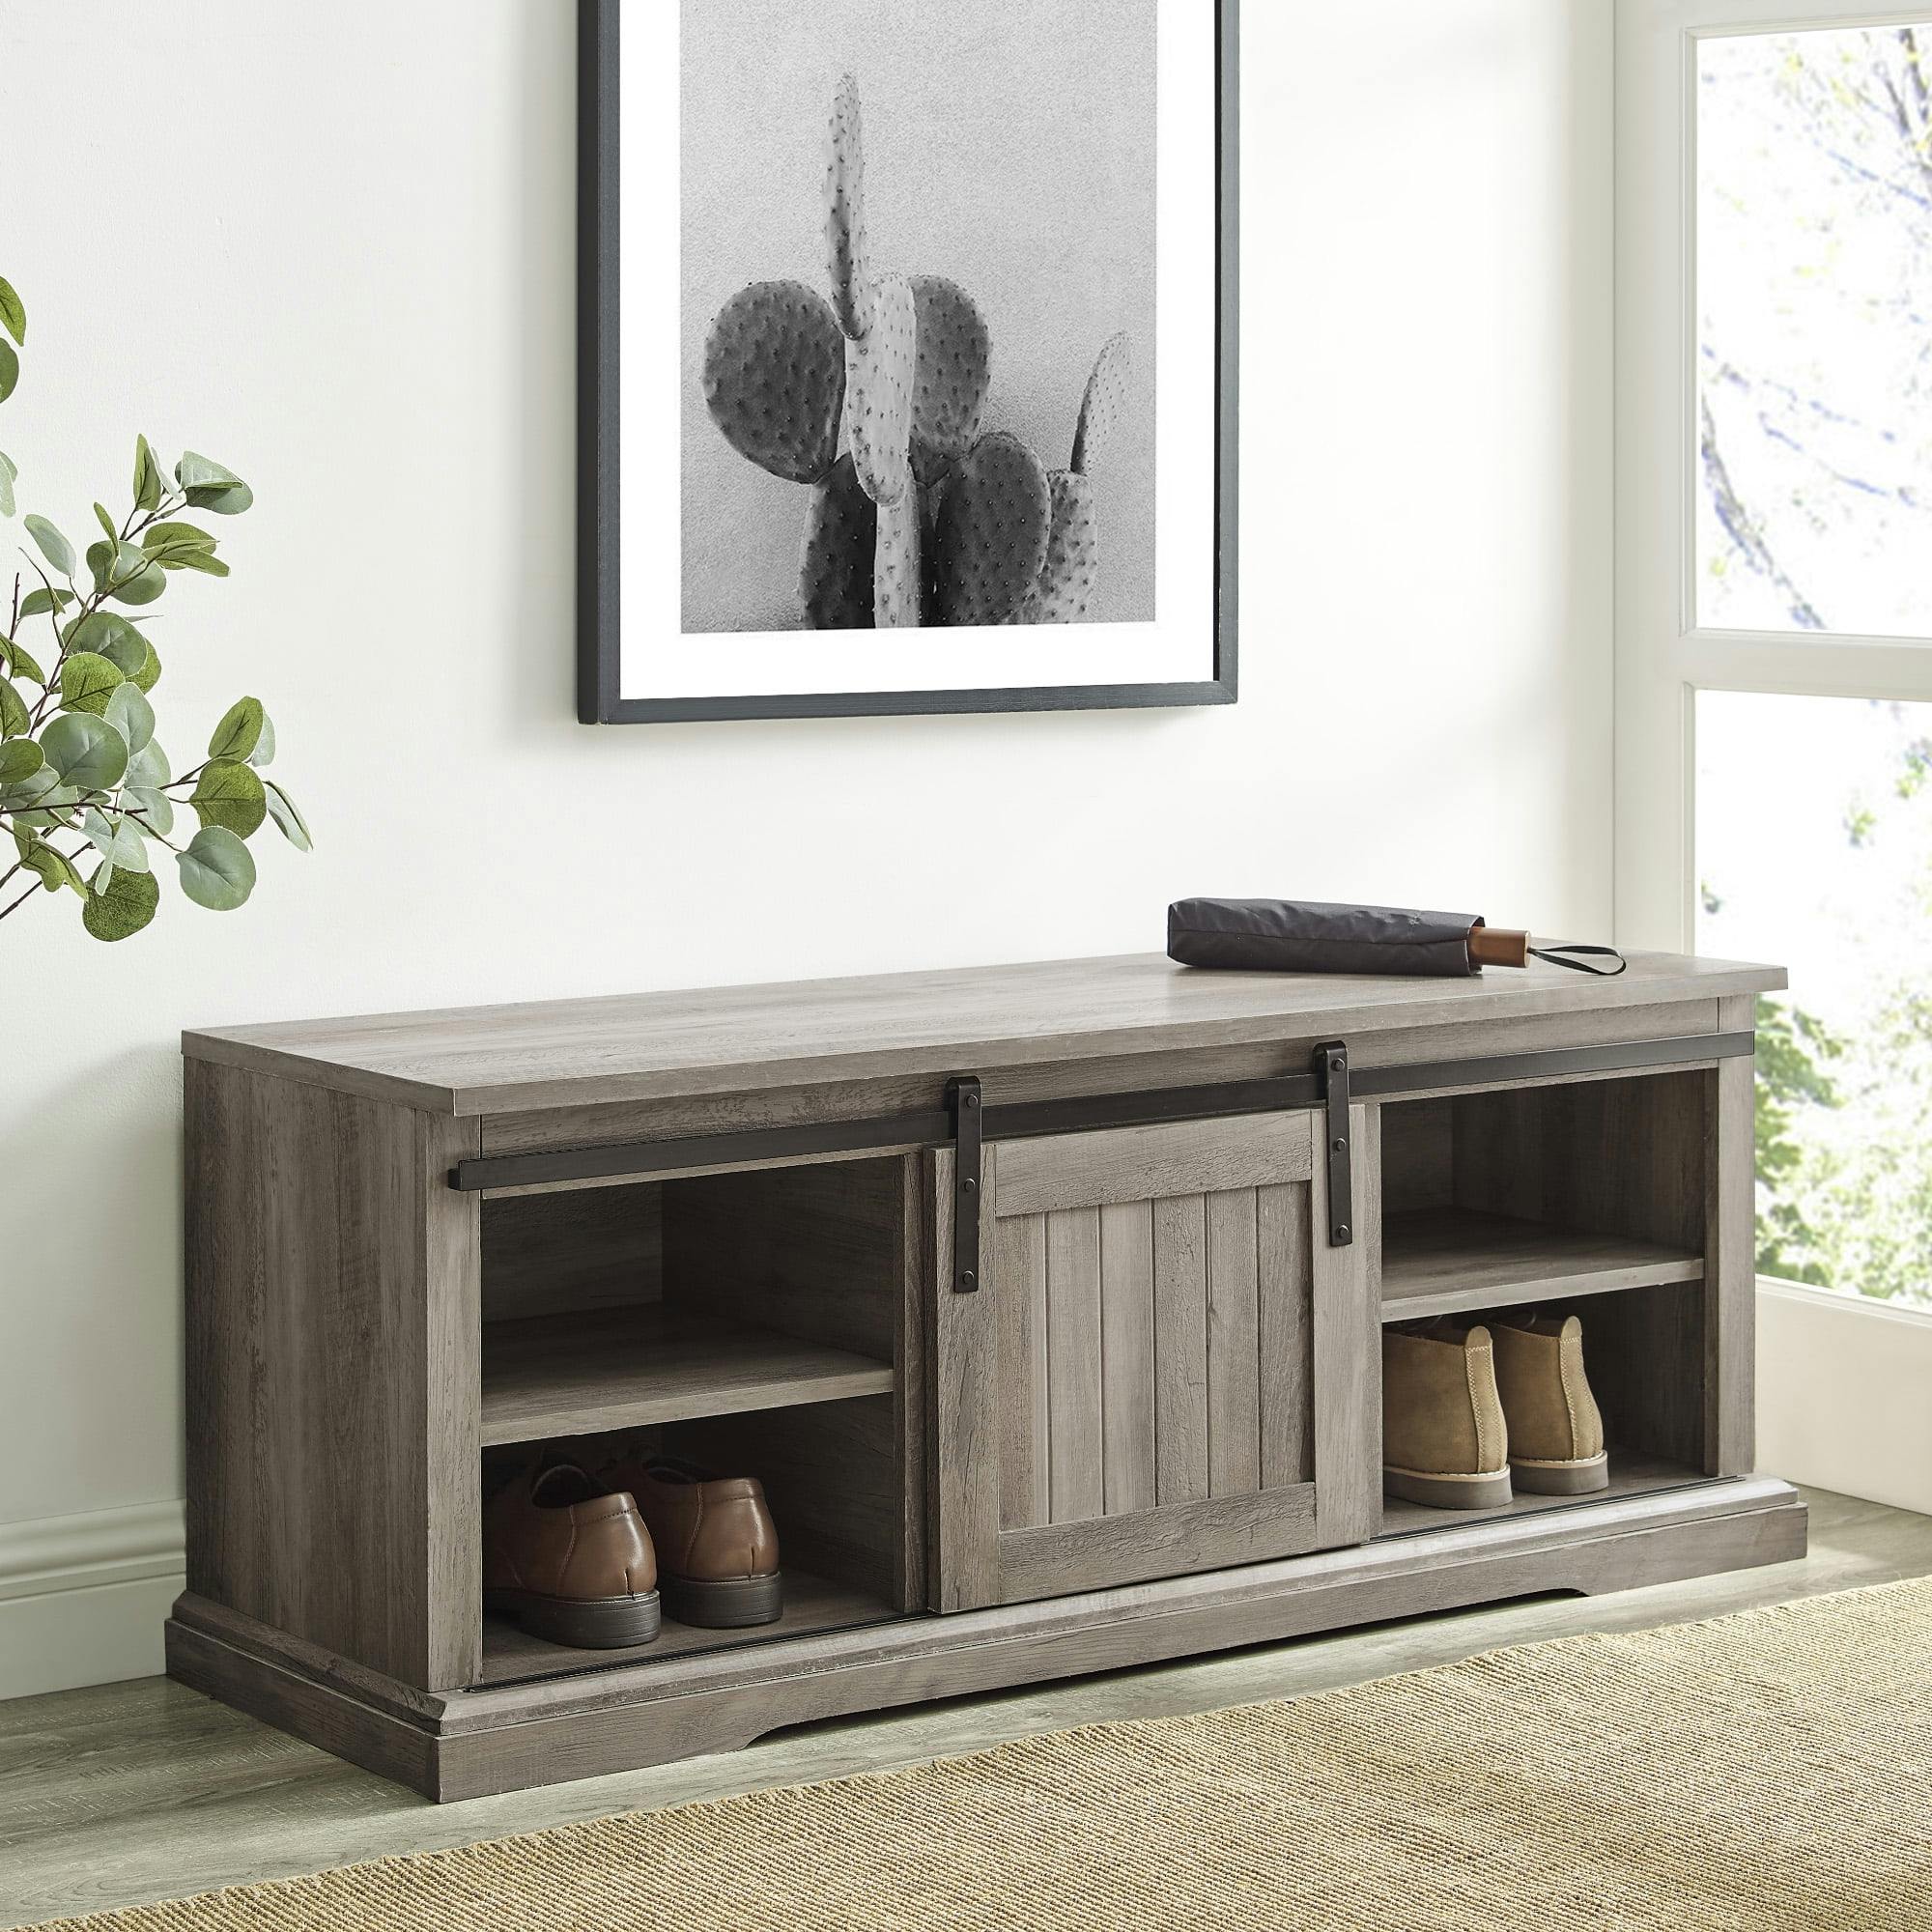 Sophie's Farmhouse 48" Grey Wash Entry Bench with Sliding Door